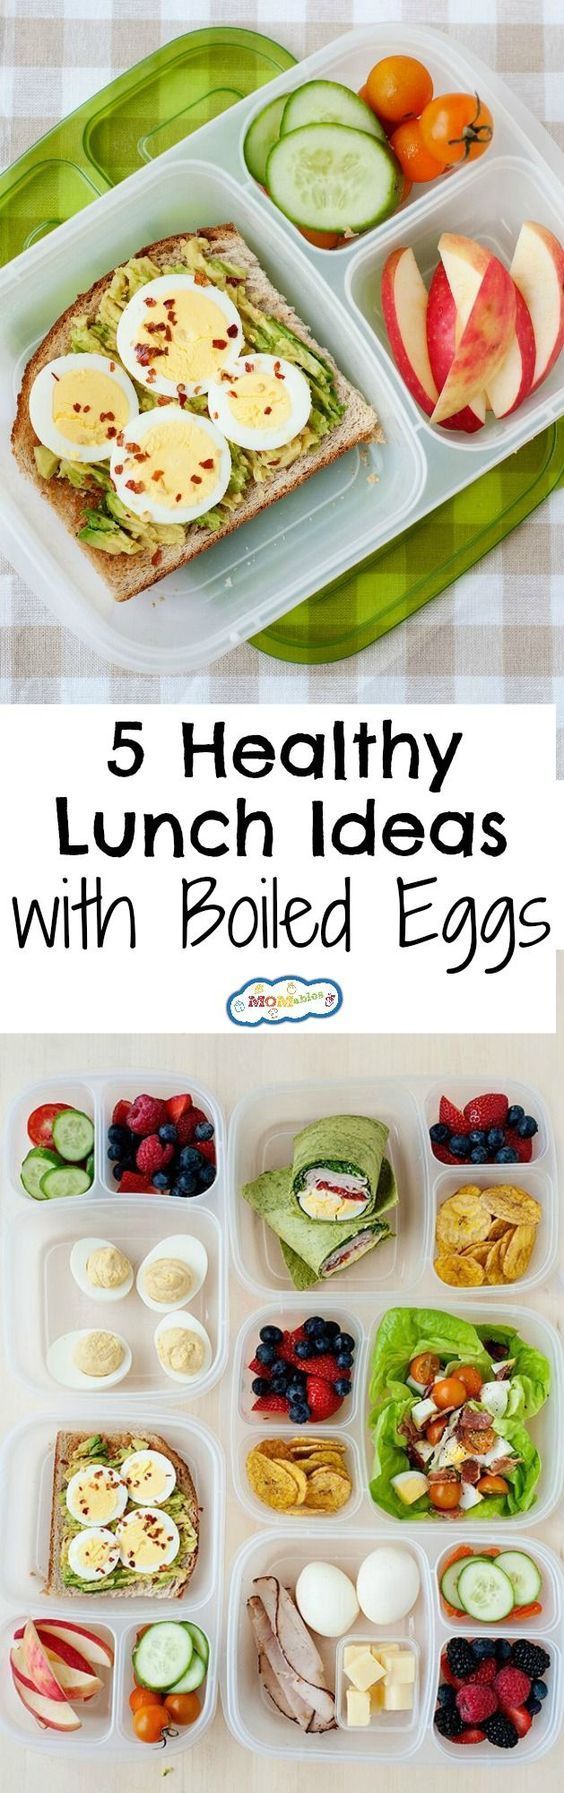 5 easy lunches using hard boiled eggs. High in protein and easy to make lunch ideas.